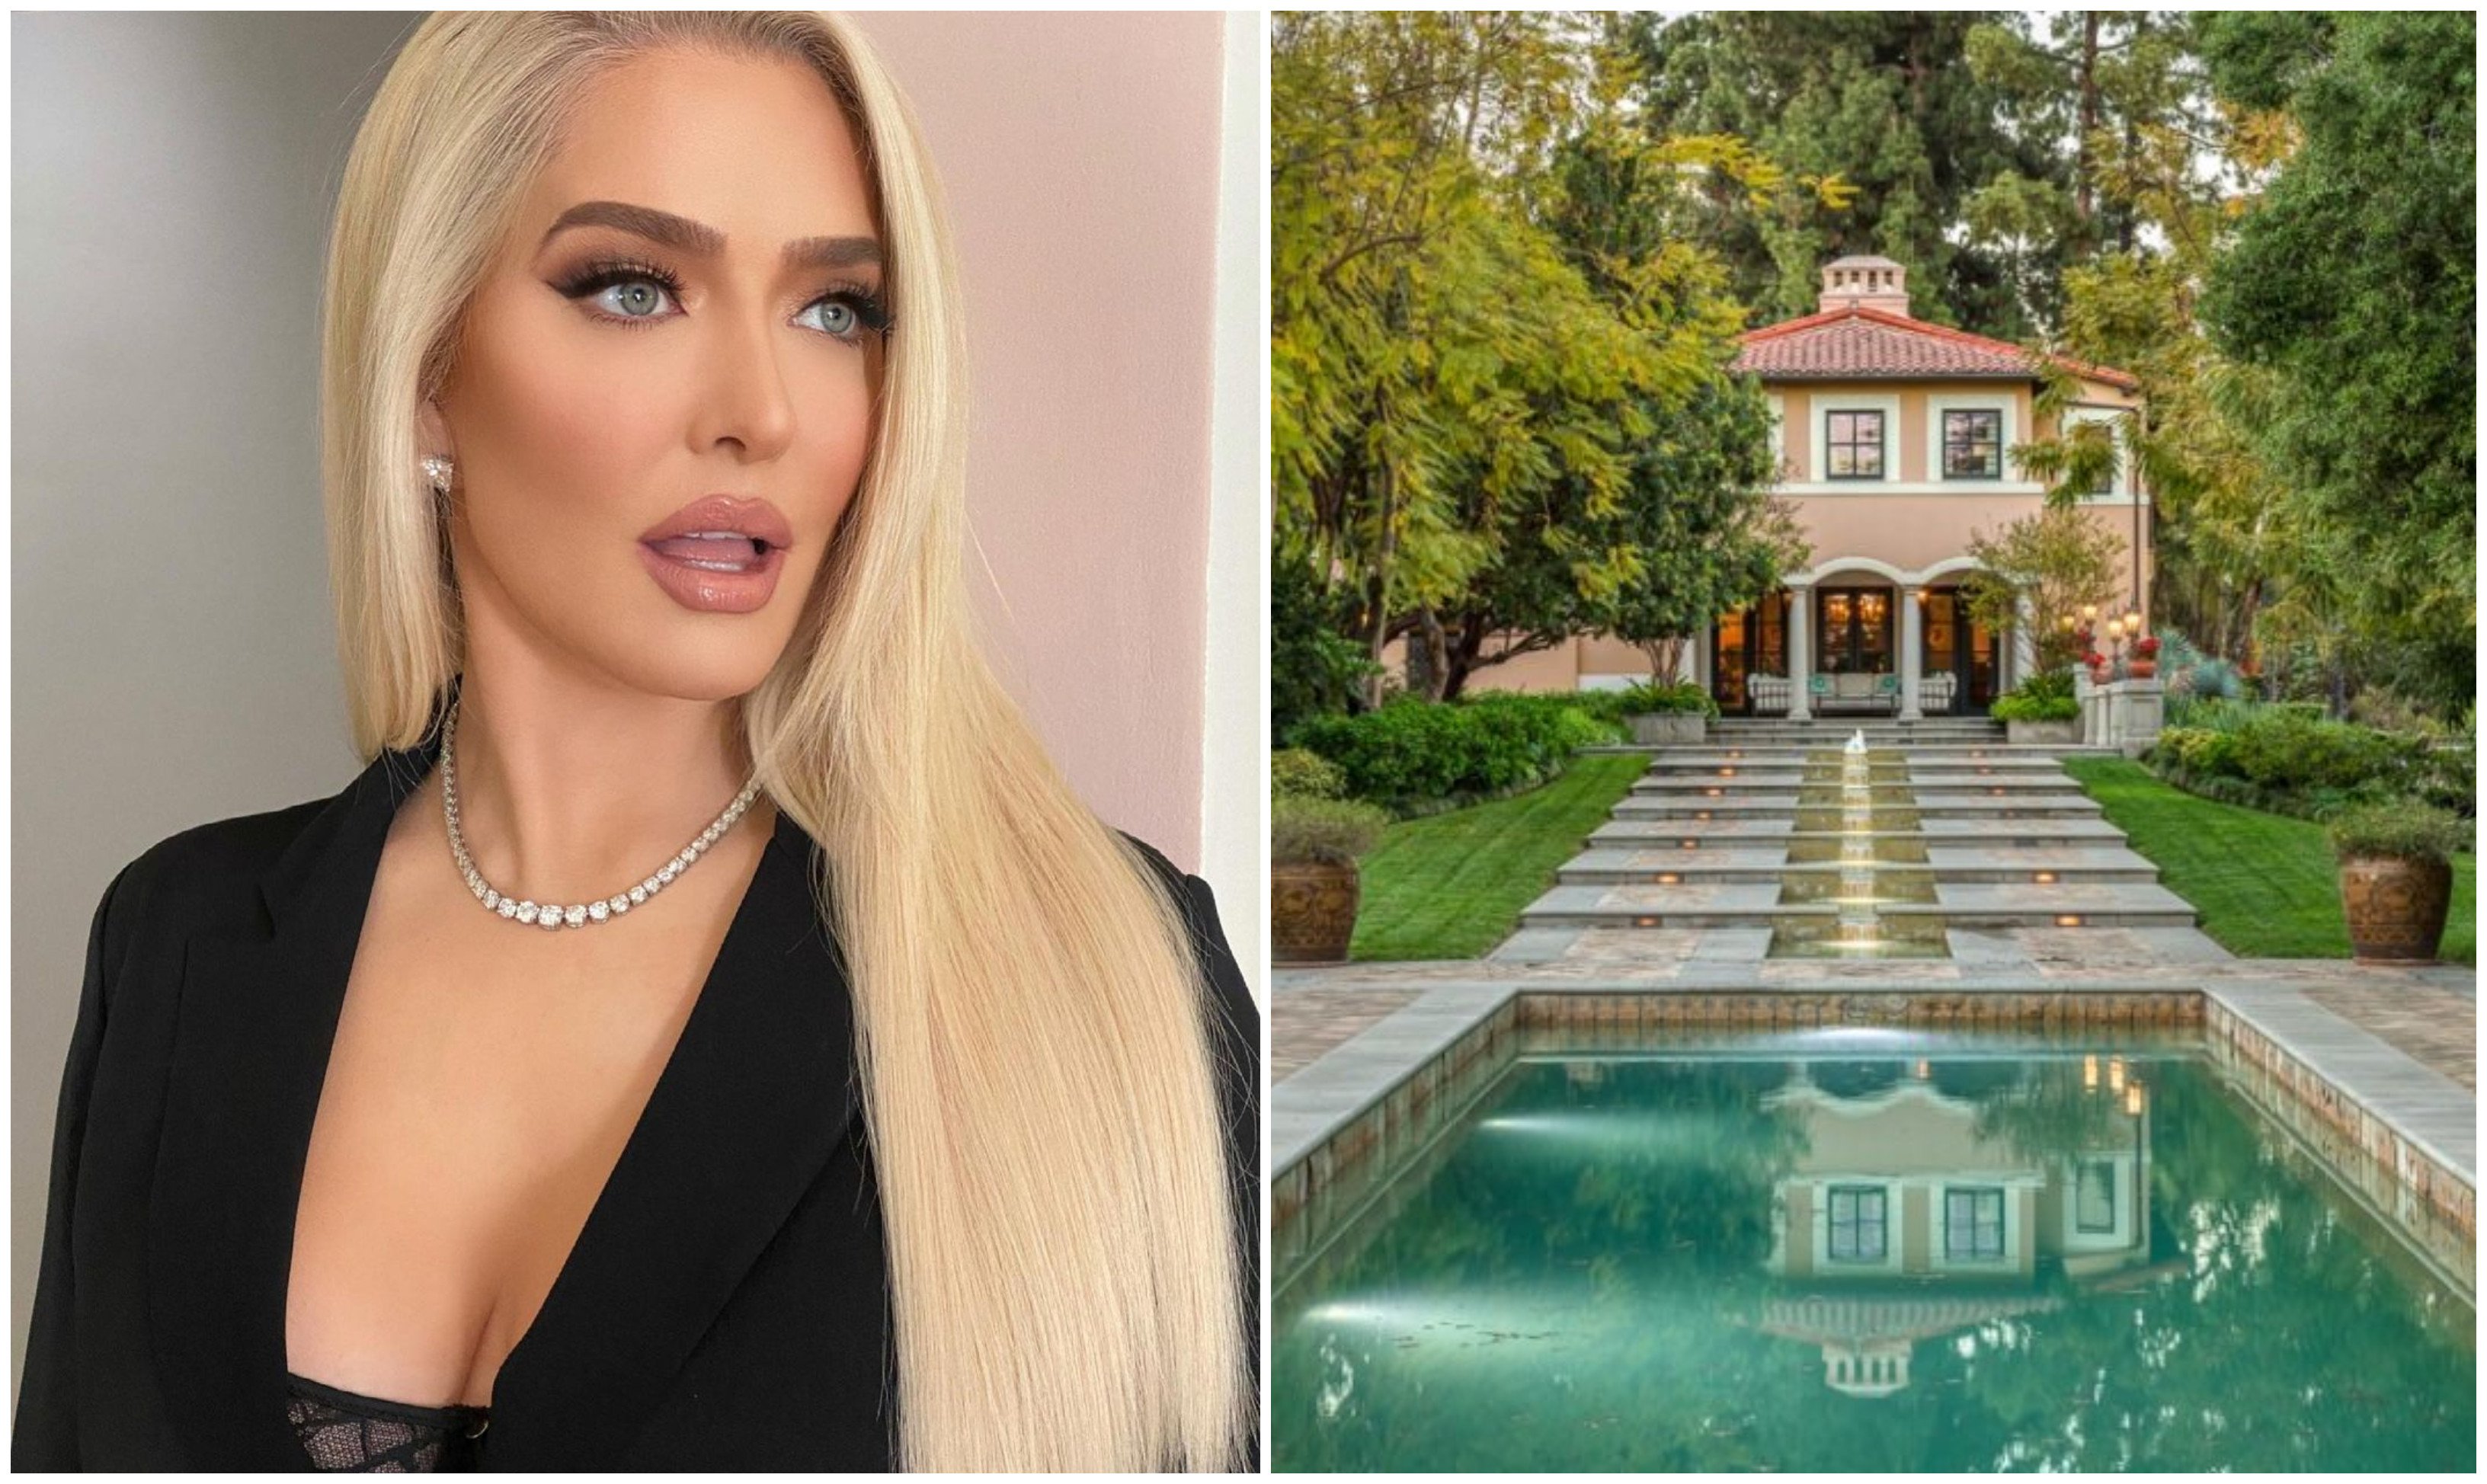 Erika Jayne and her Pasadena mansion – now on the market for US$13 million. Photos: @theprettymess/Instagram, TopTenRealEstateDeals.com